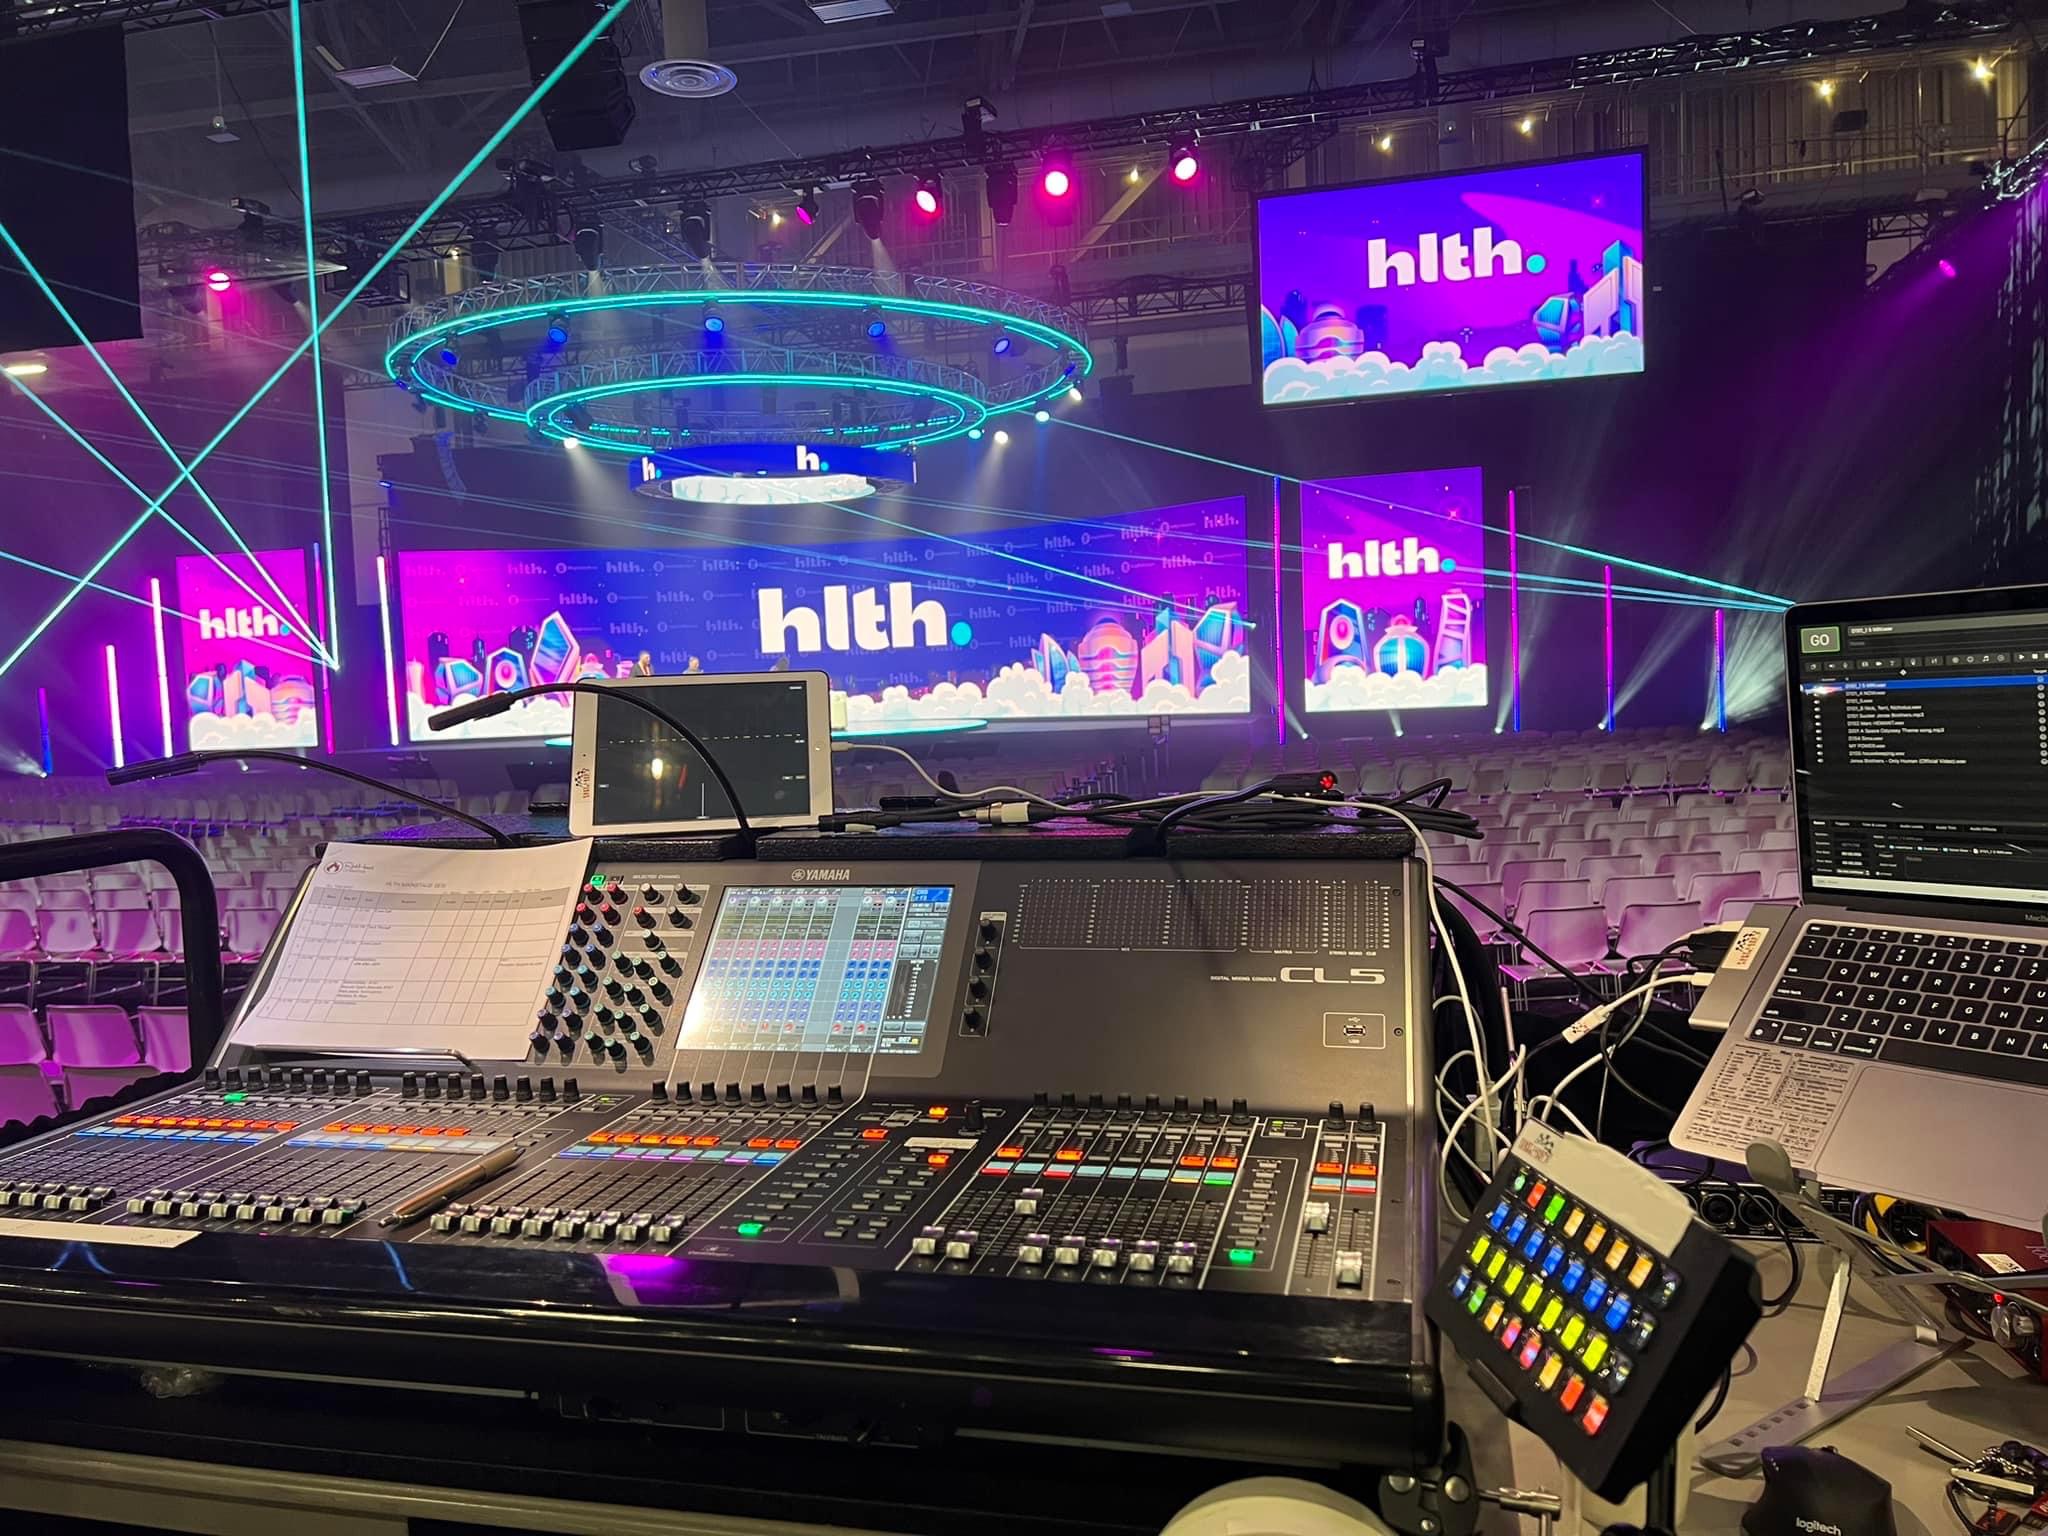 Control panel of an event production setup with sound and light mixing boards, overlooking an empty venue with chairs and large screens displaying the text "hlth."